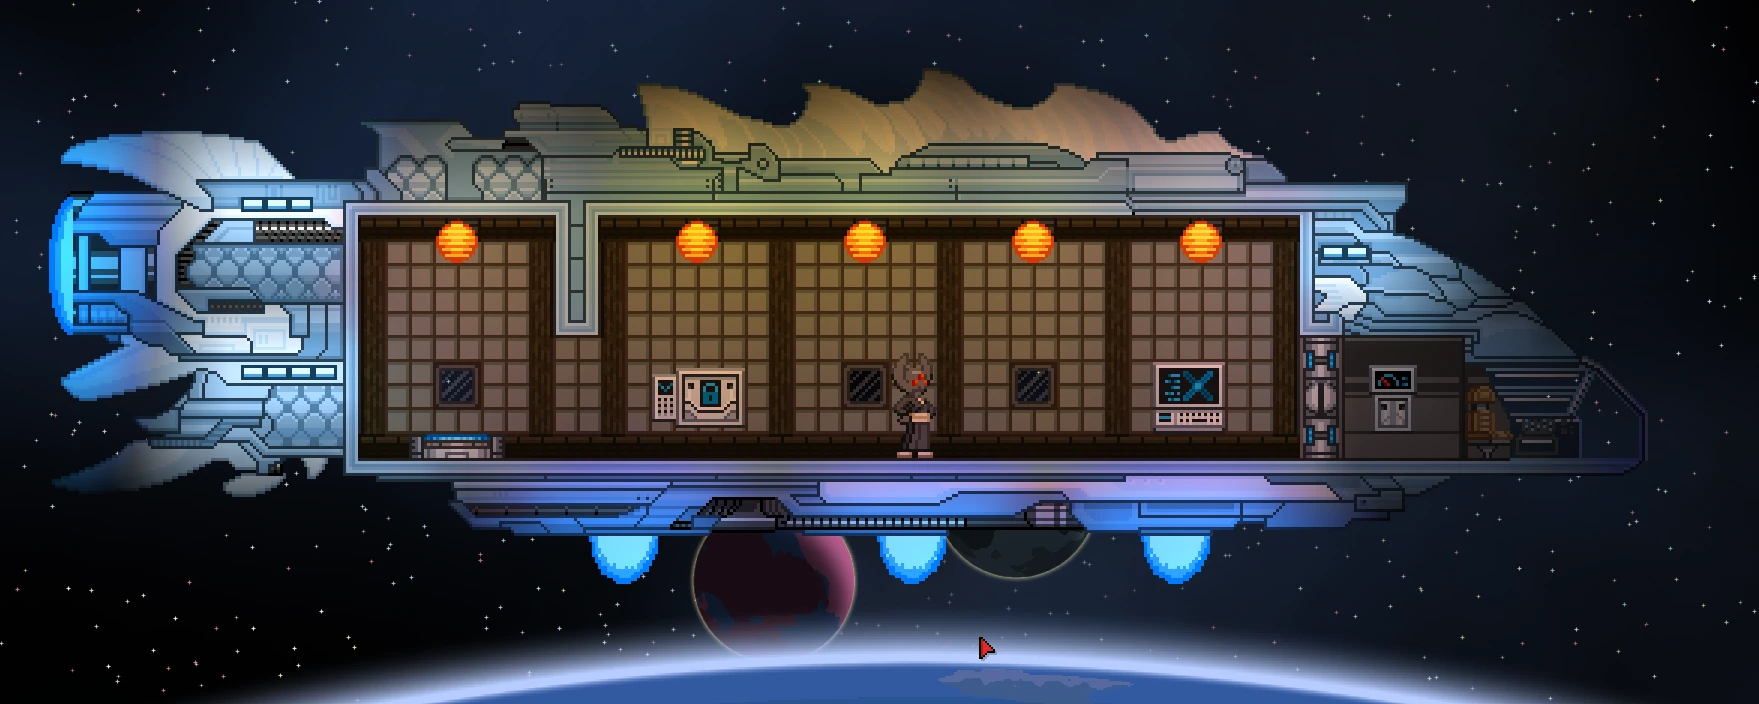 Starbound All Ships.